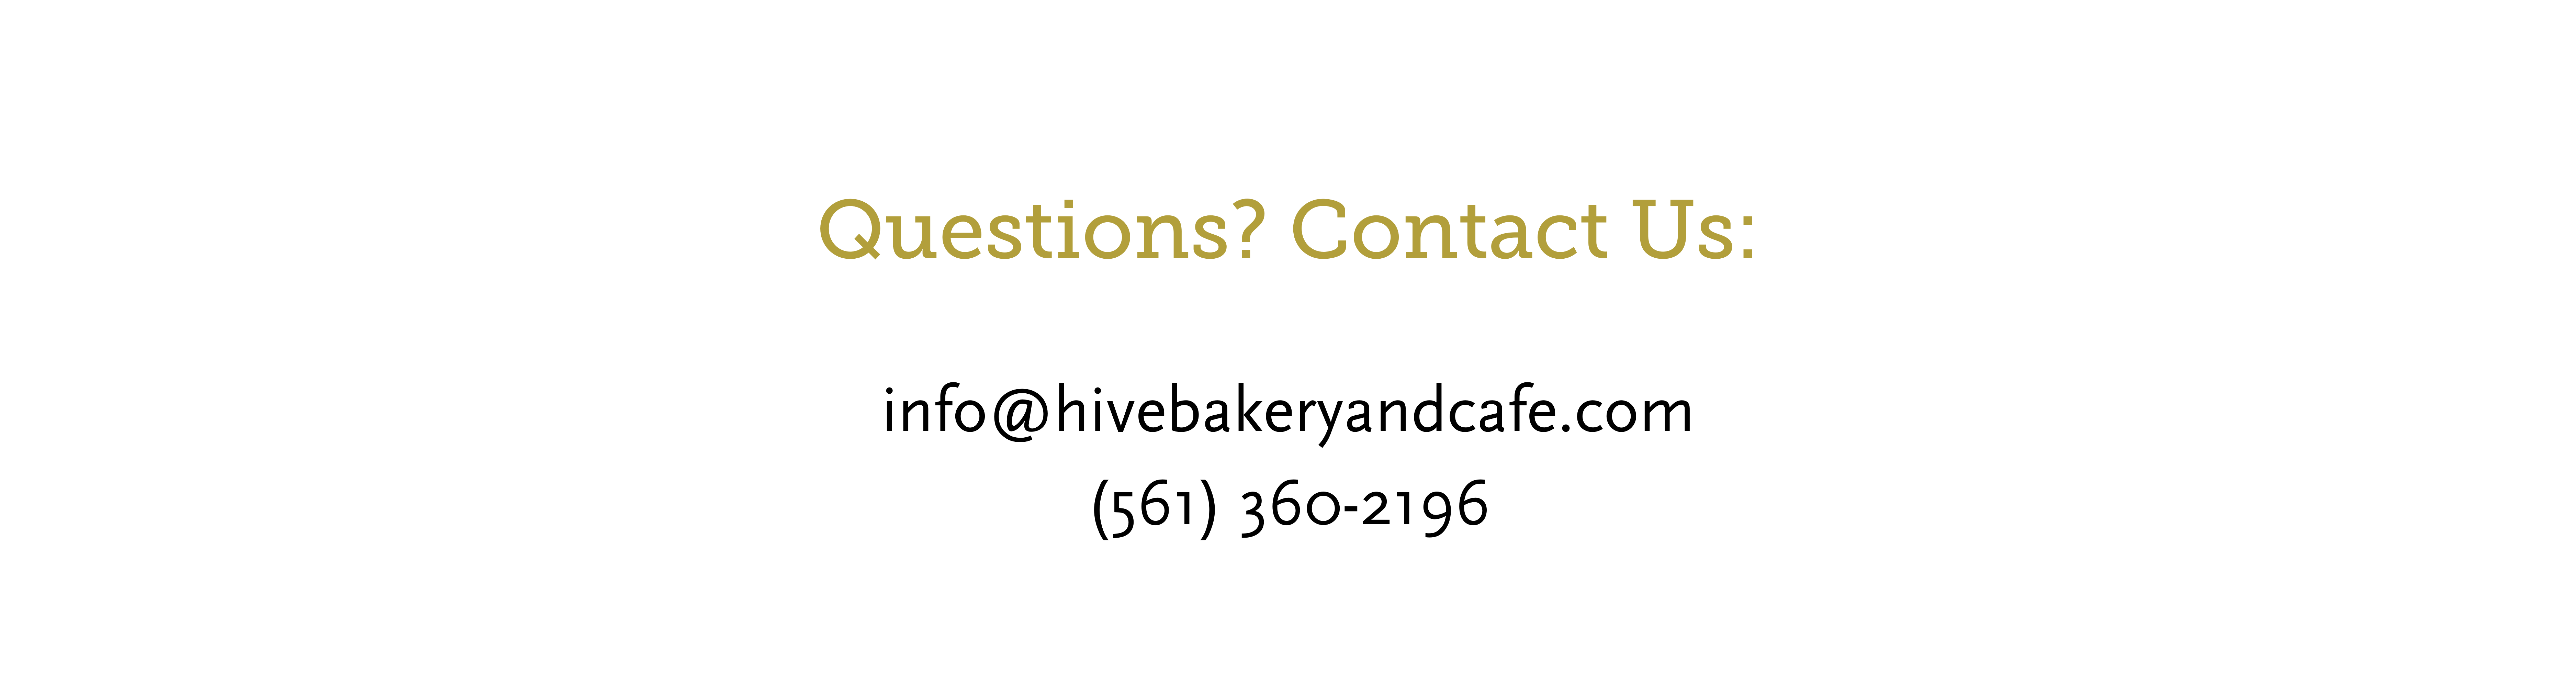 Questions? Contact Us at info@hivebakeryandcafe.com or call us at 561-360-2196